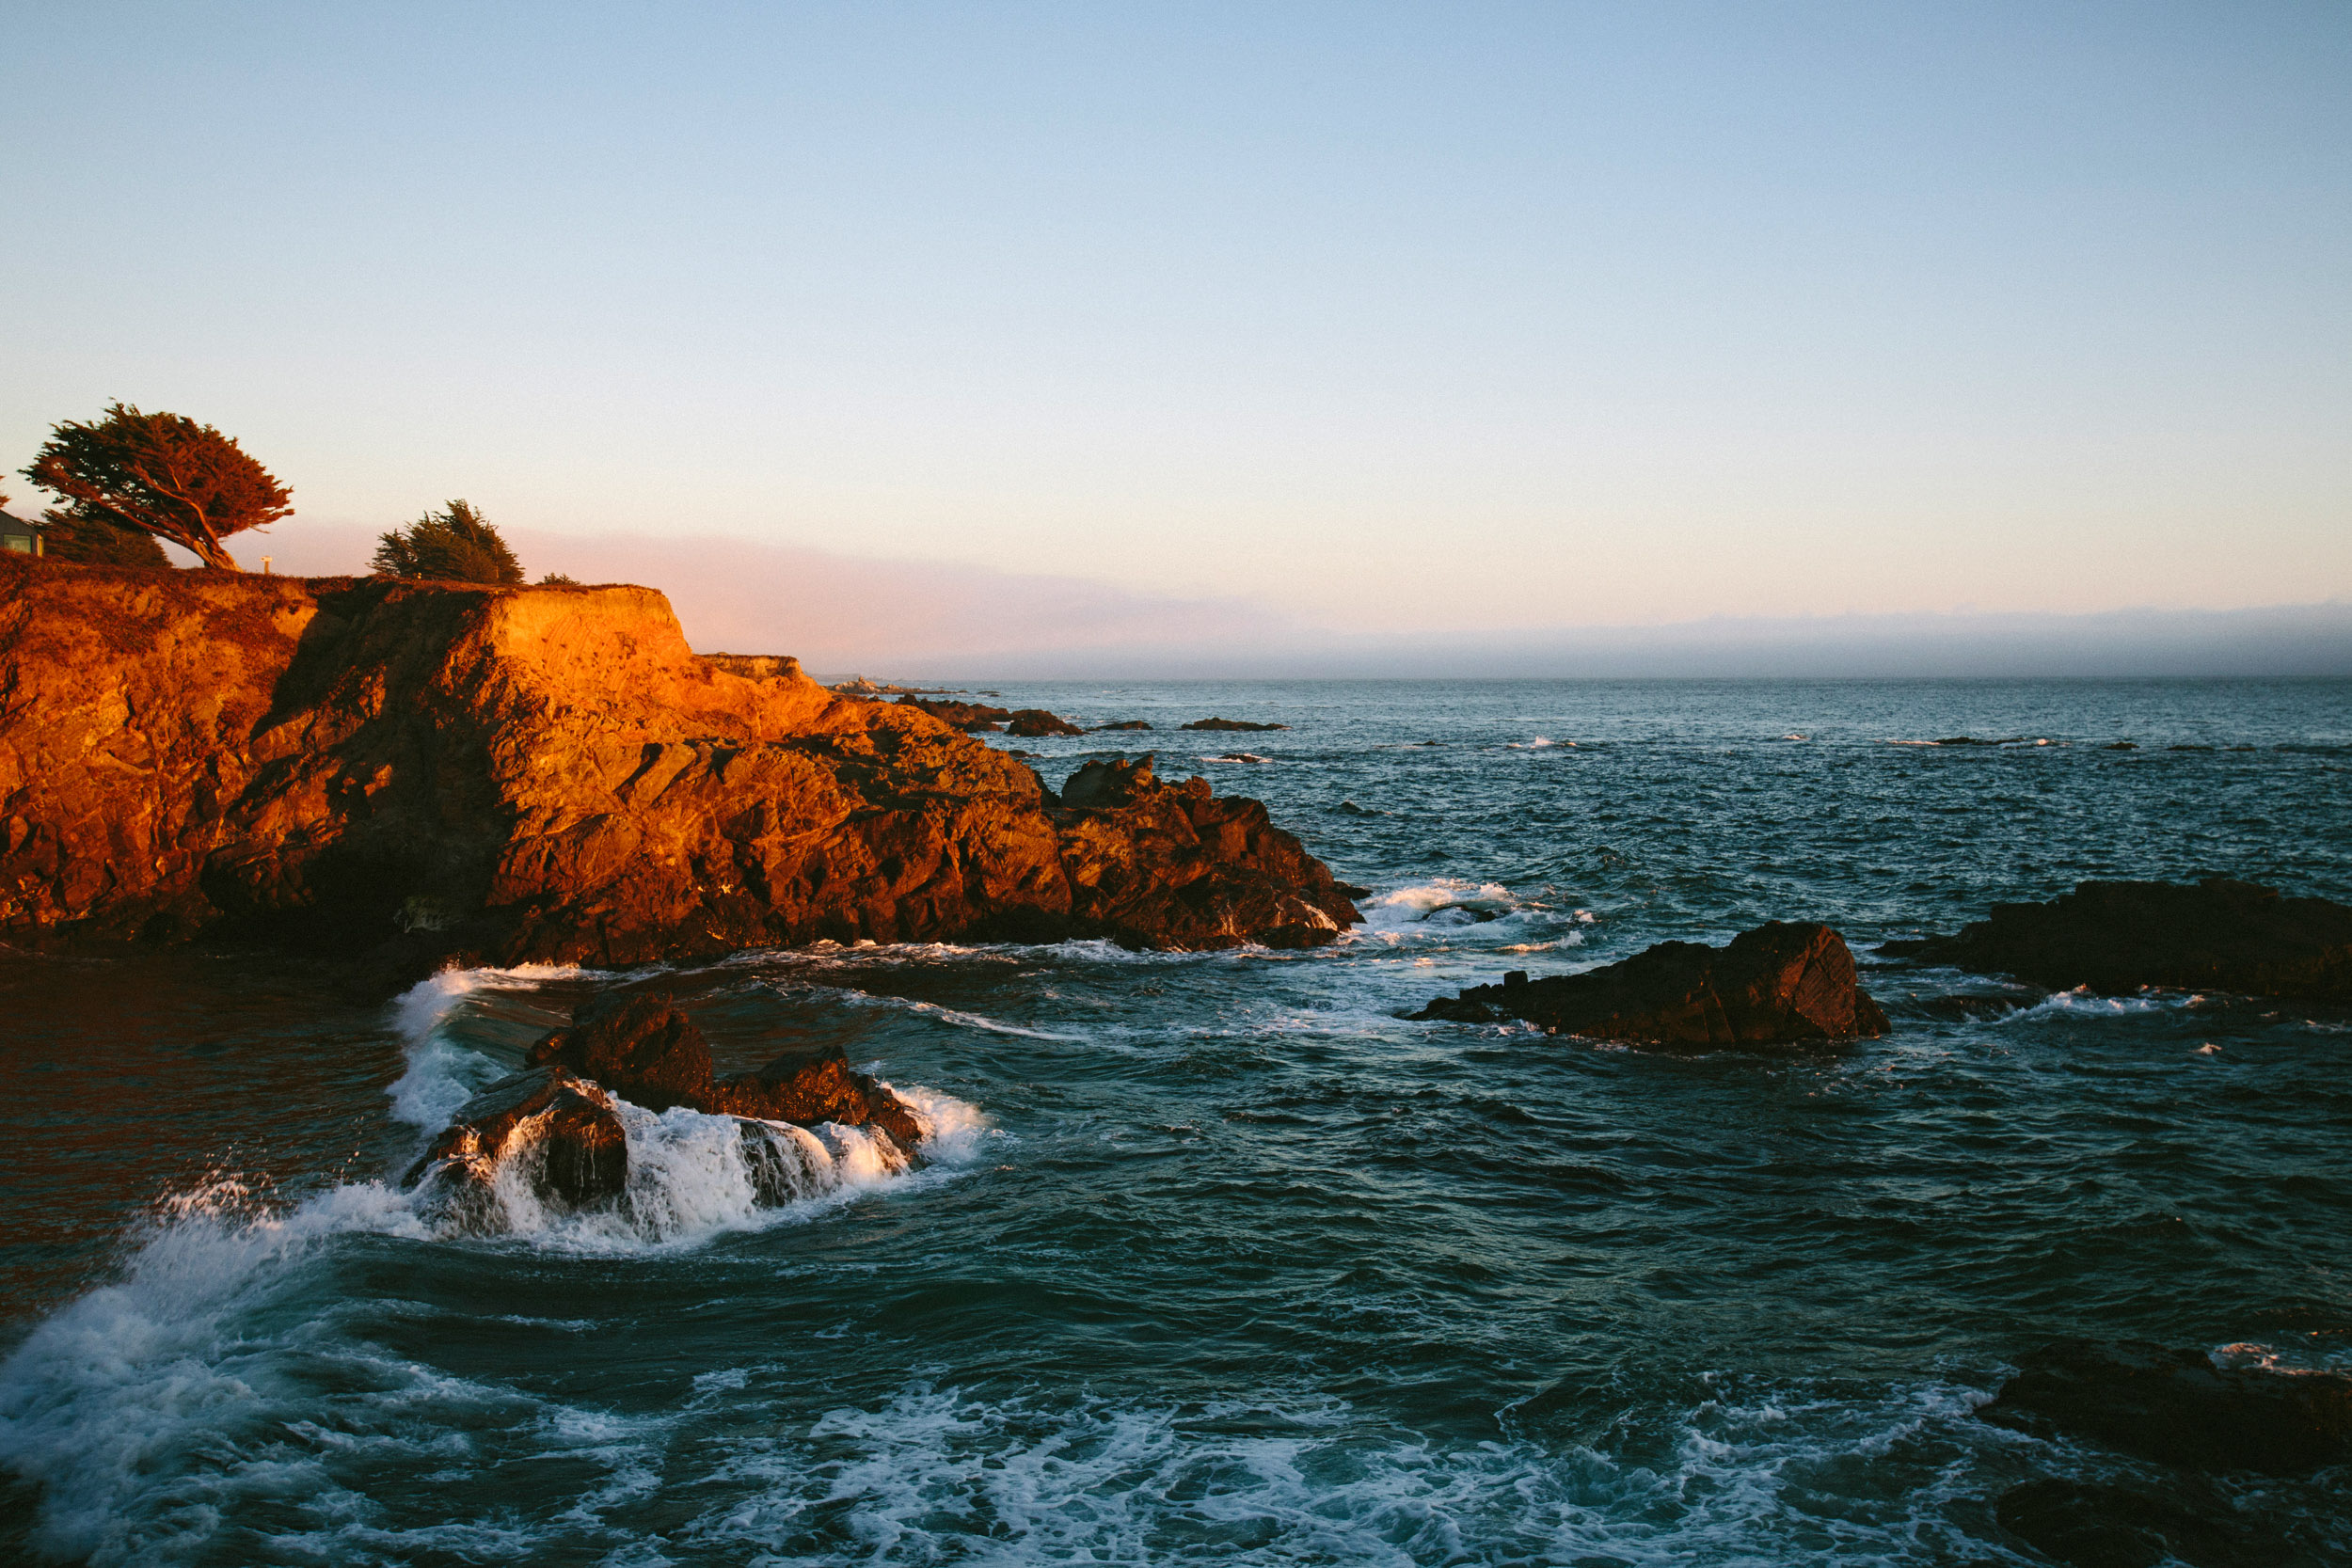 Waves crash on the rocks at sunset in Sea Ranch, northern California